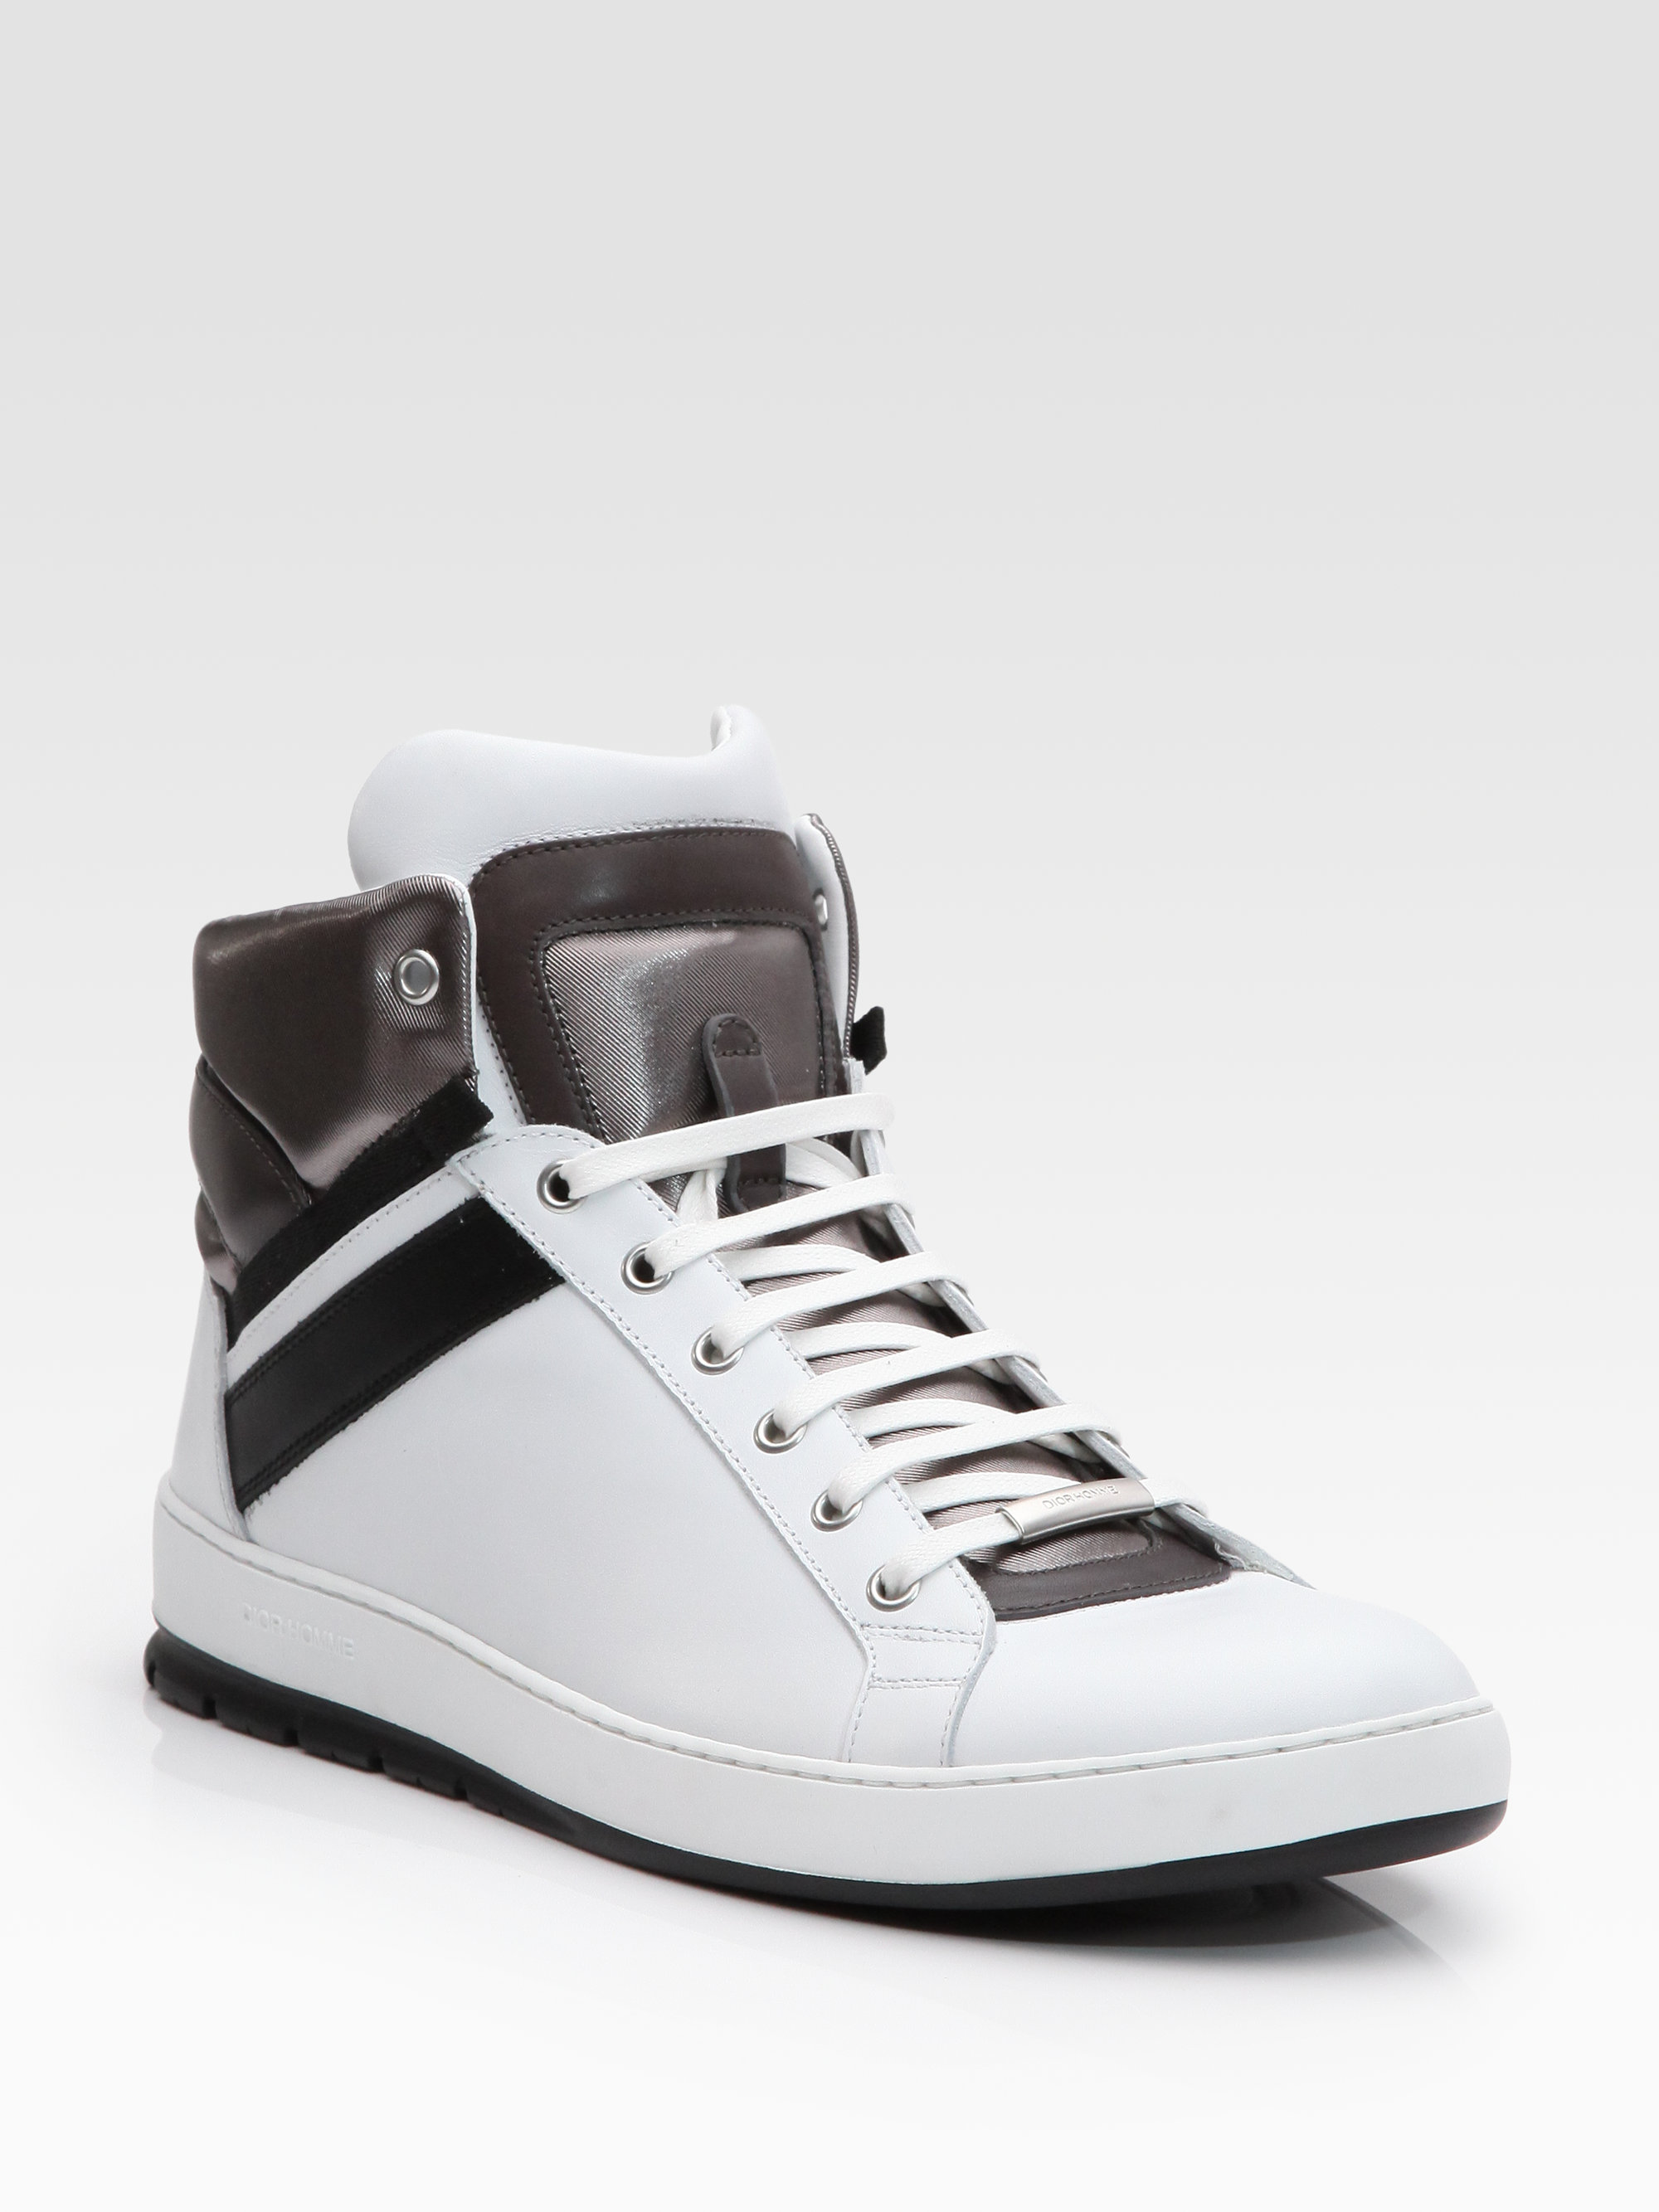 Dior Homme Hightop Sneakers in White 